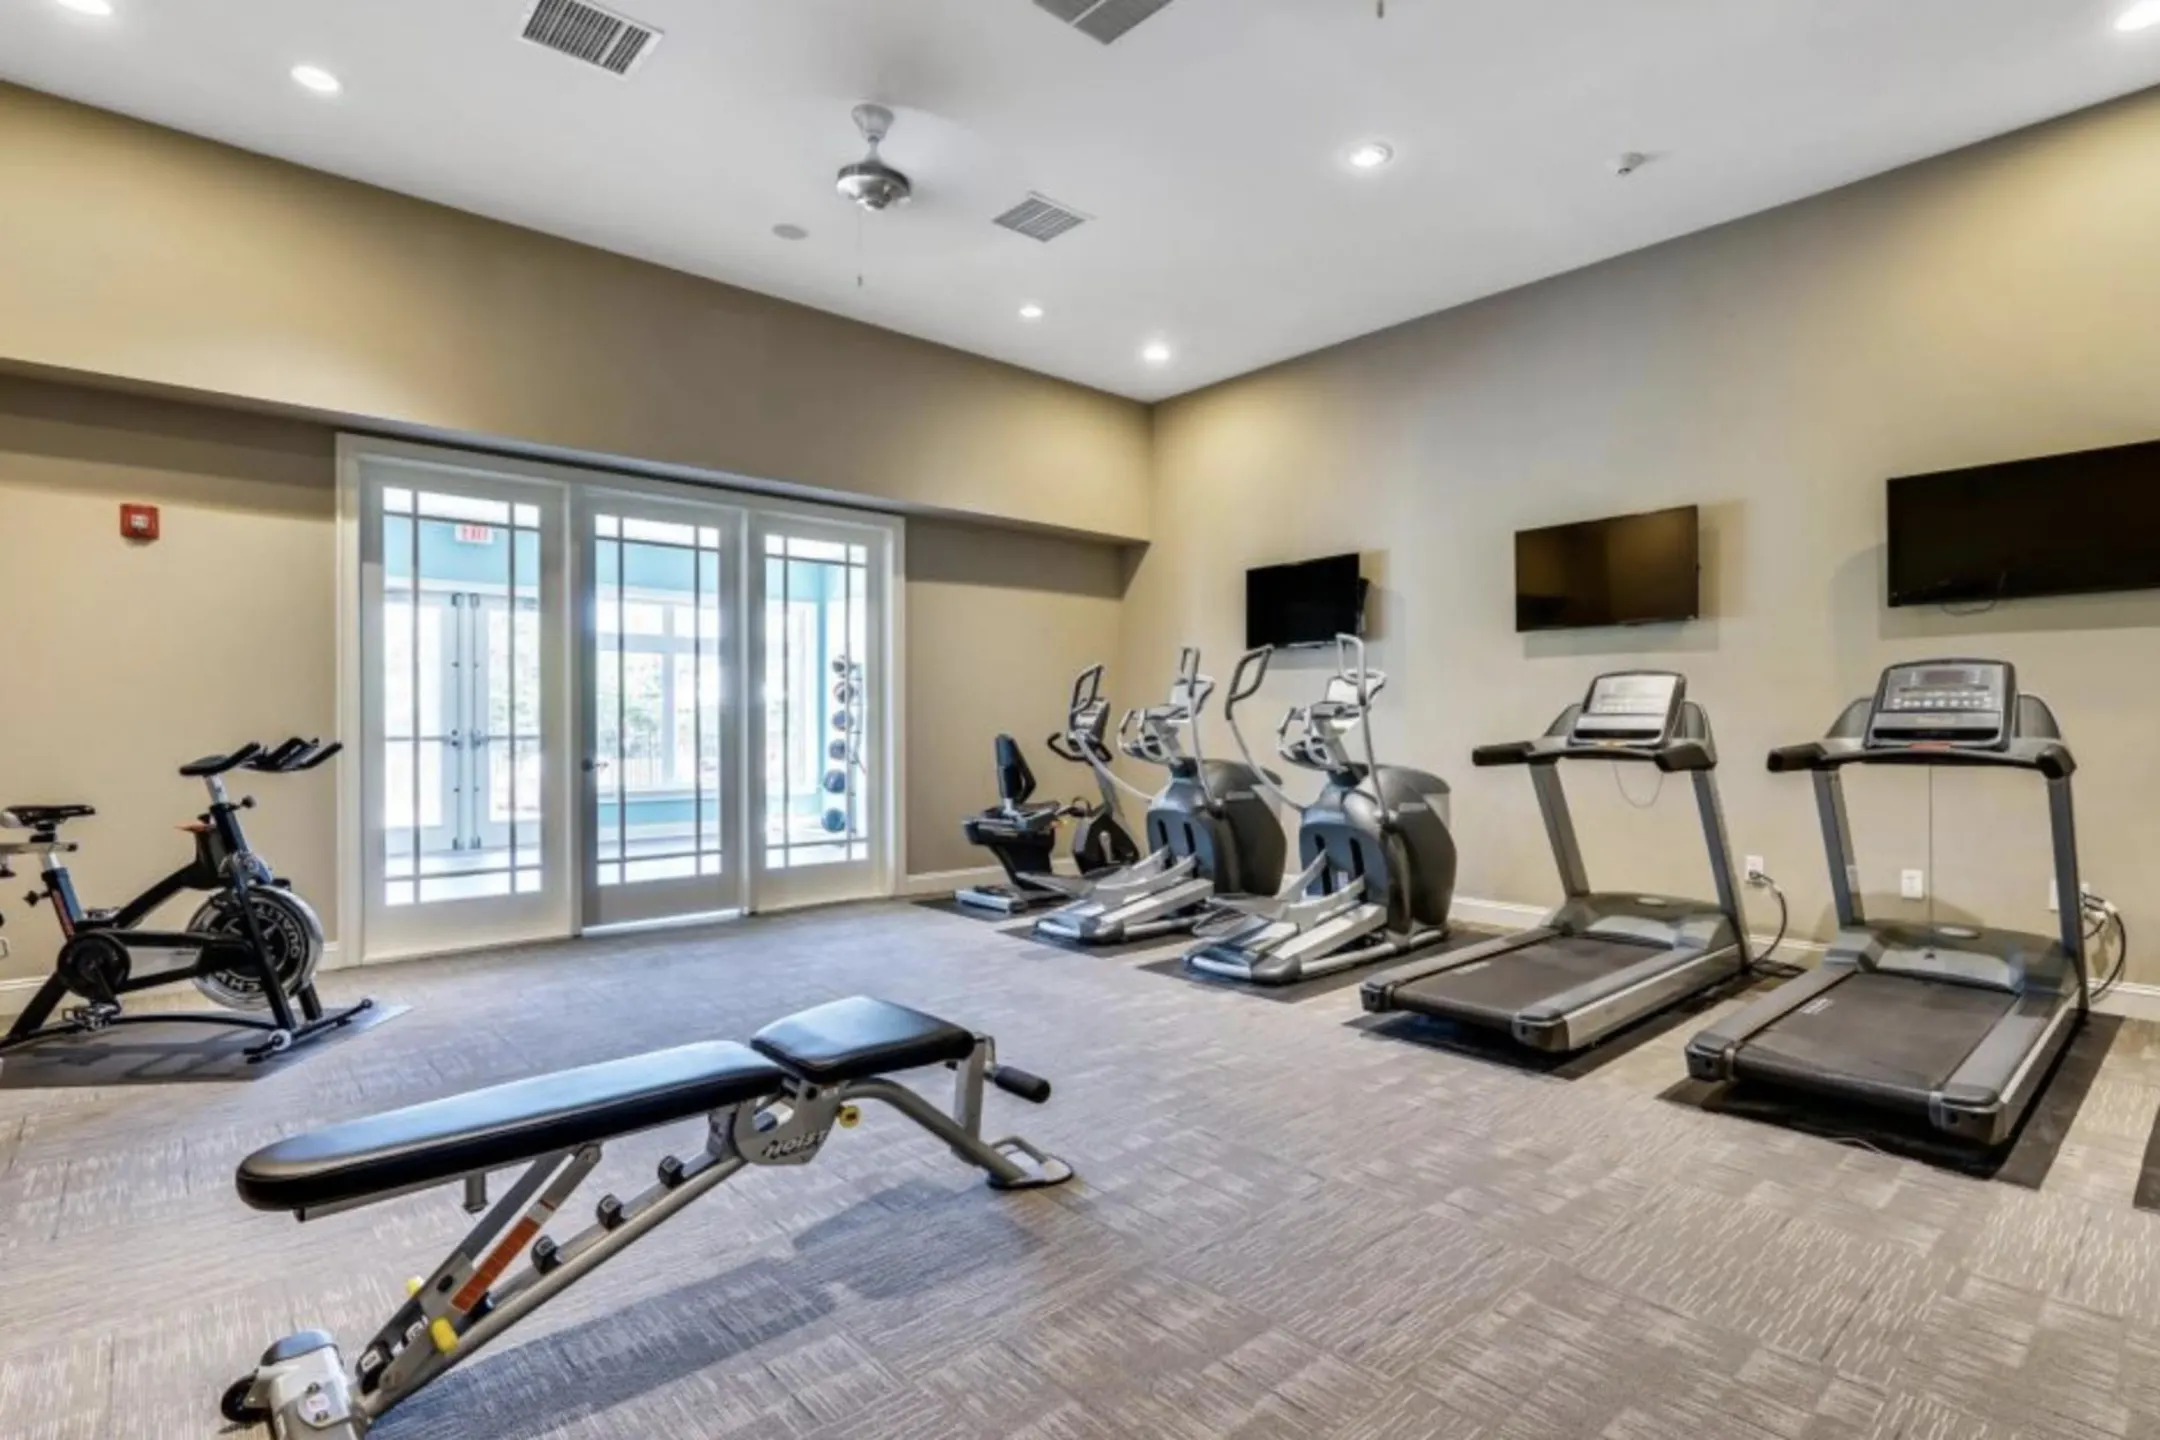 Fitness Weight Room - 55+ Living Mi-Place at the Shore - Absecon, NJ